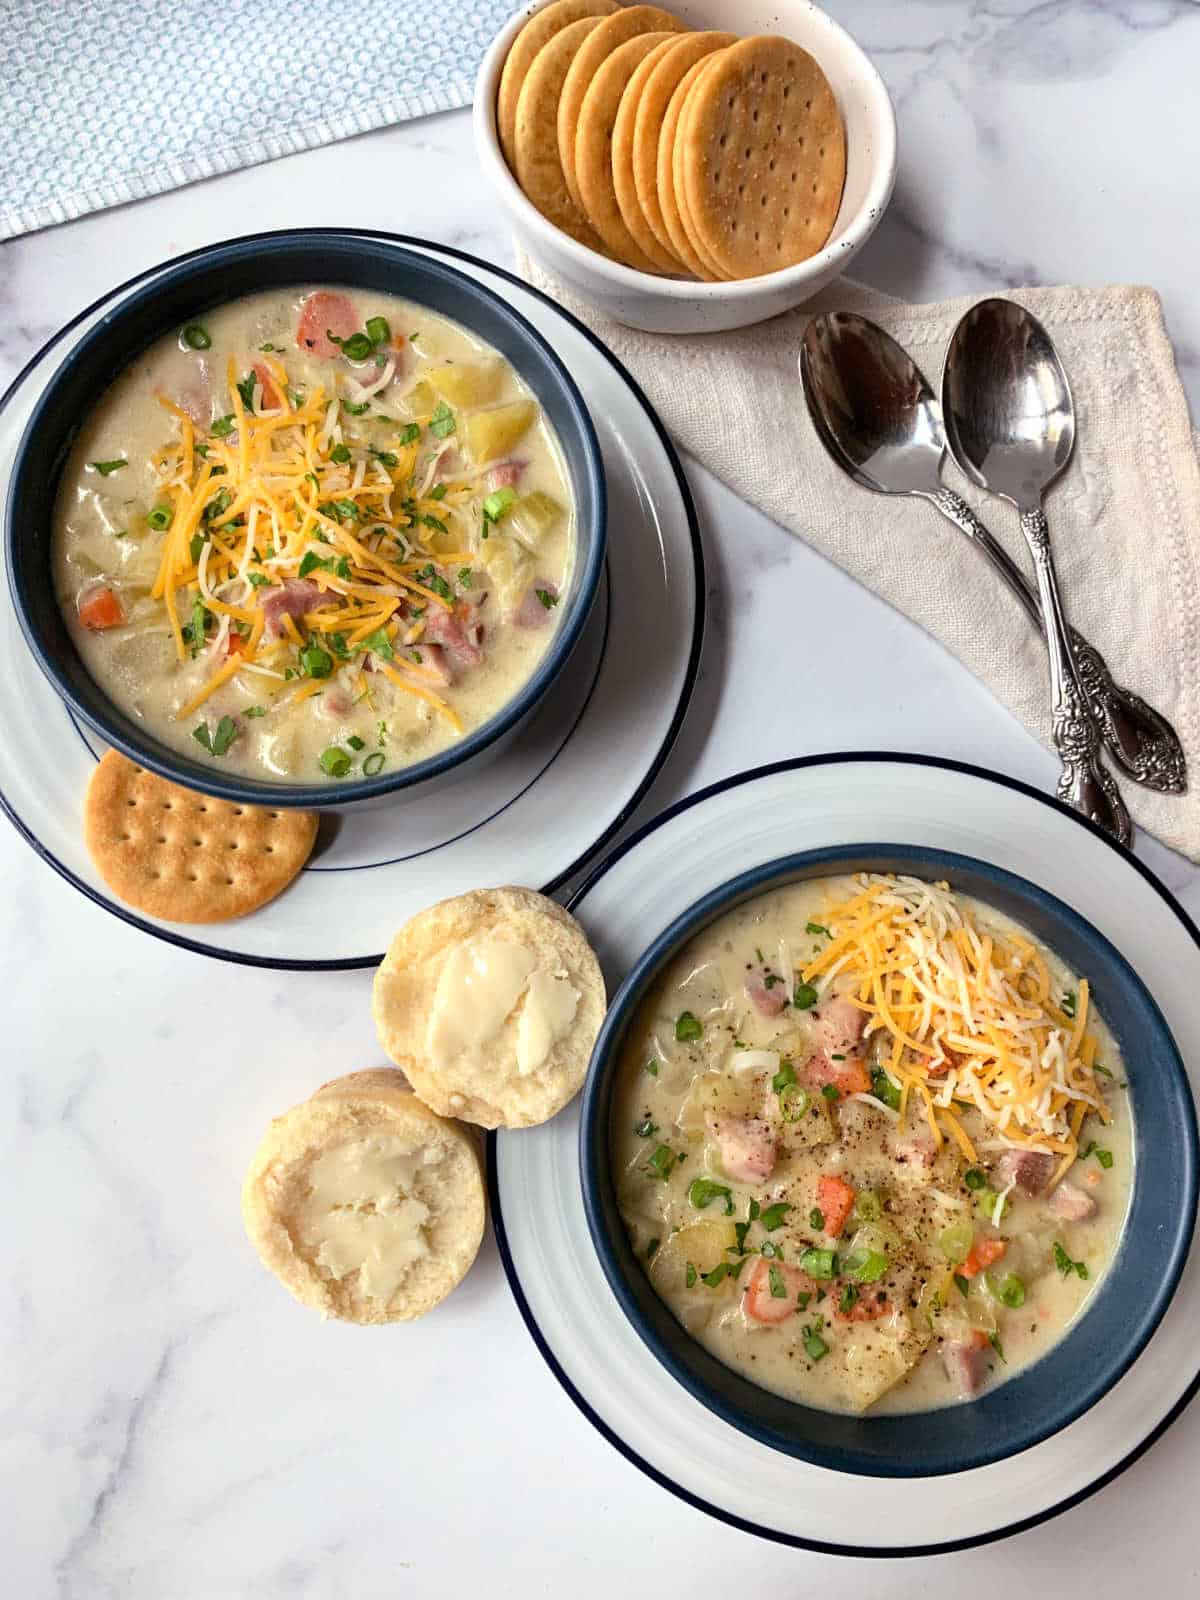 Two bowls of ham soup with crackers and biscuits.